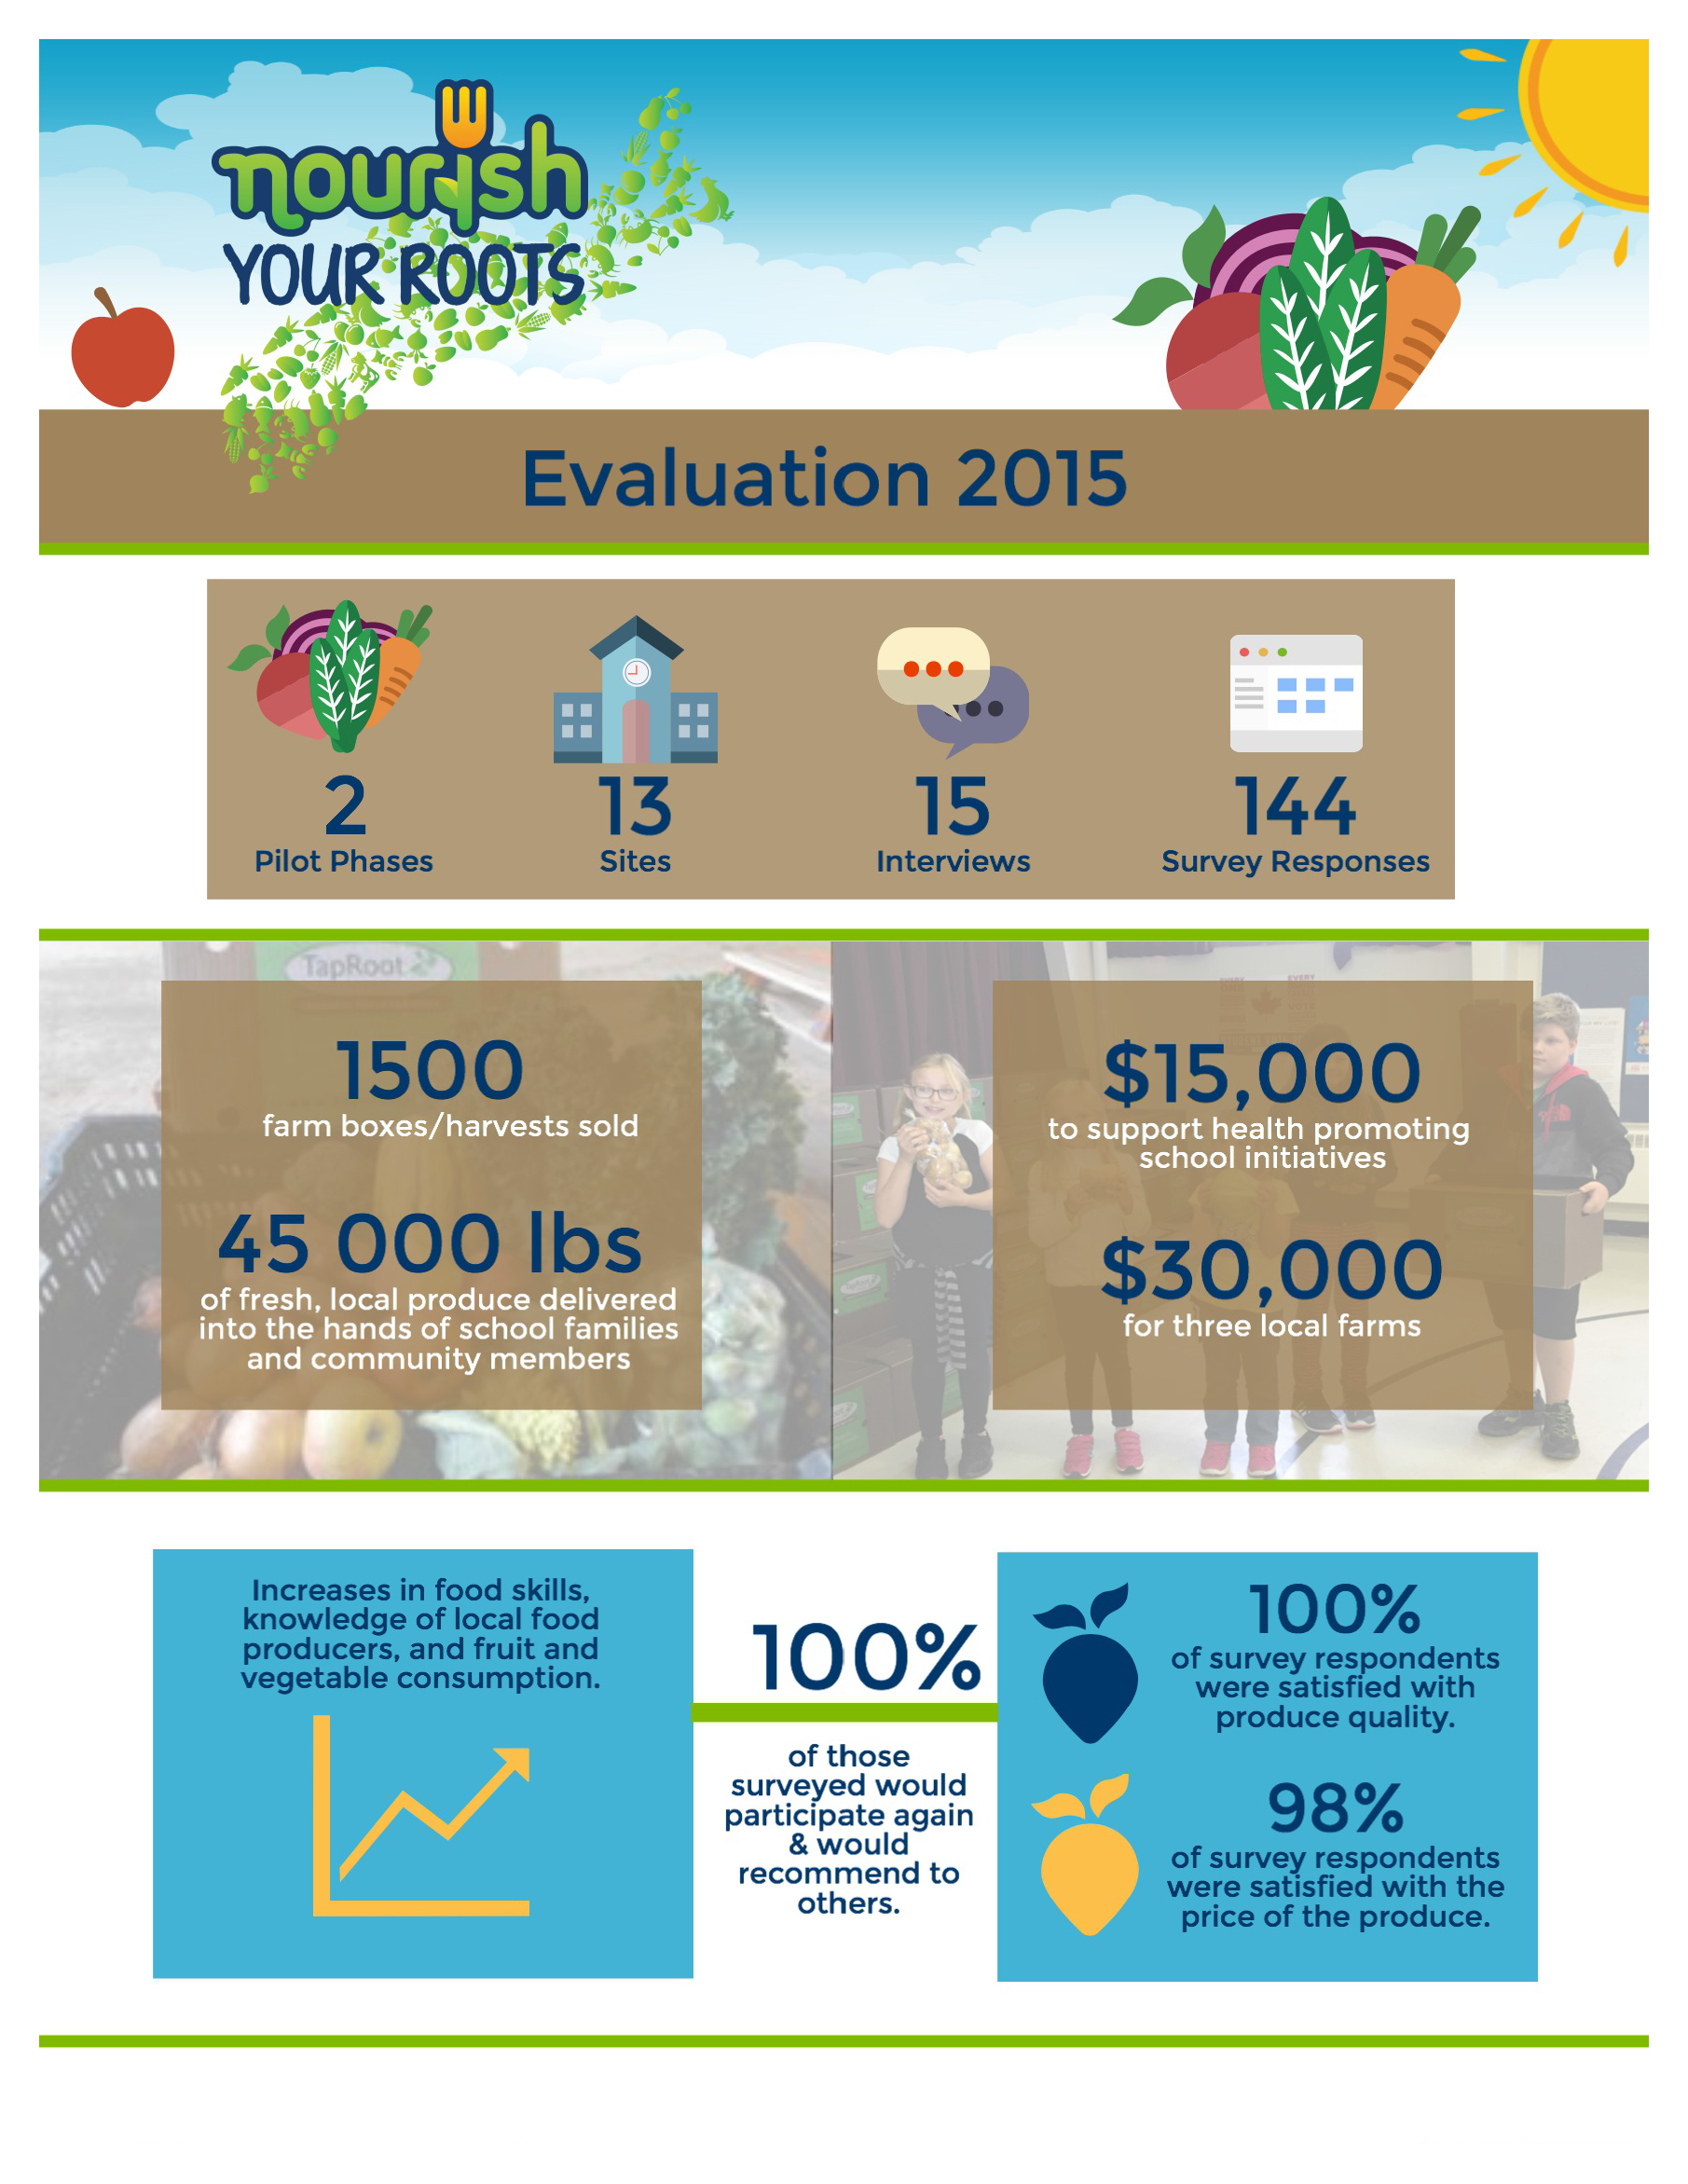 2015 Nourish Your Roots Evaluation -  Infographic